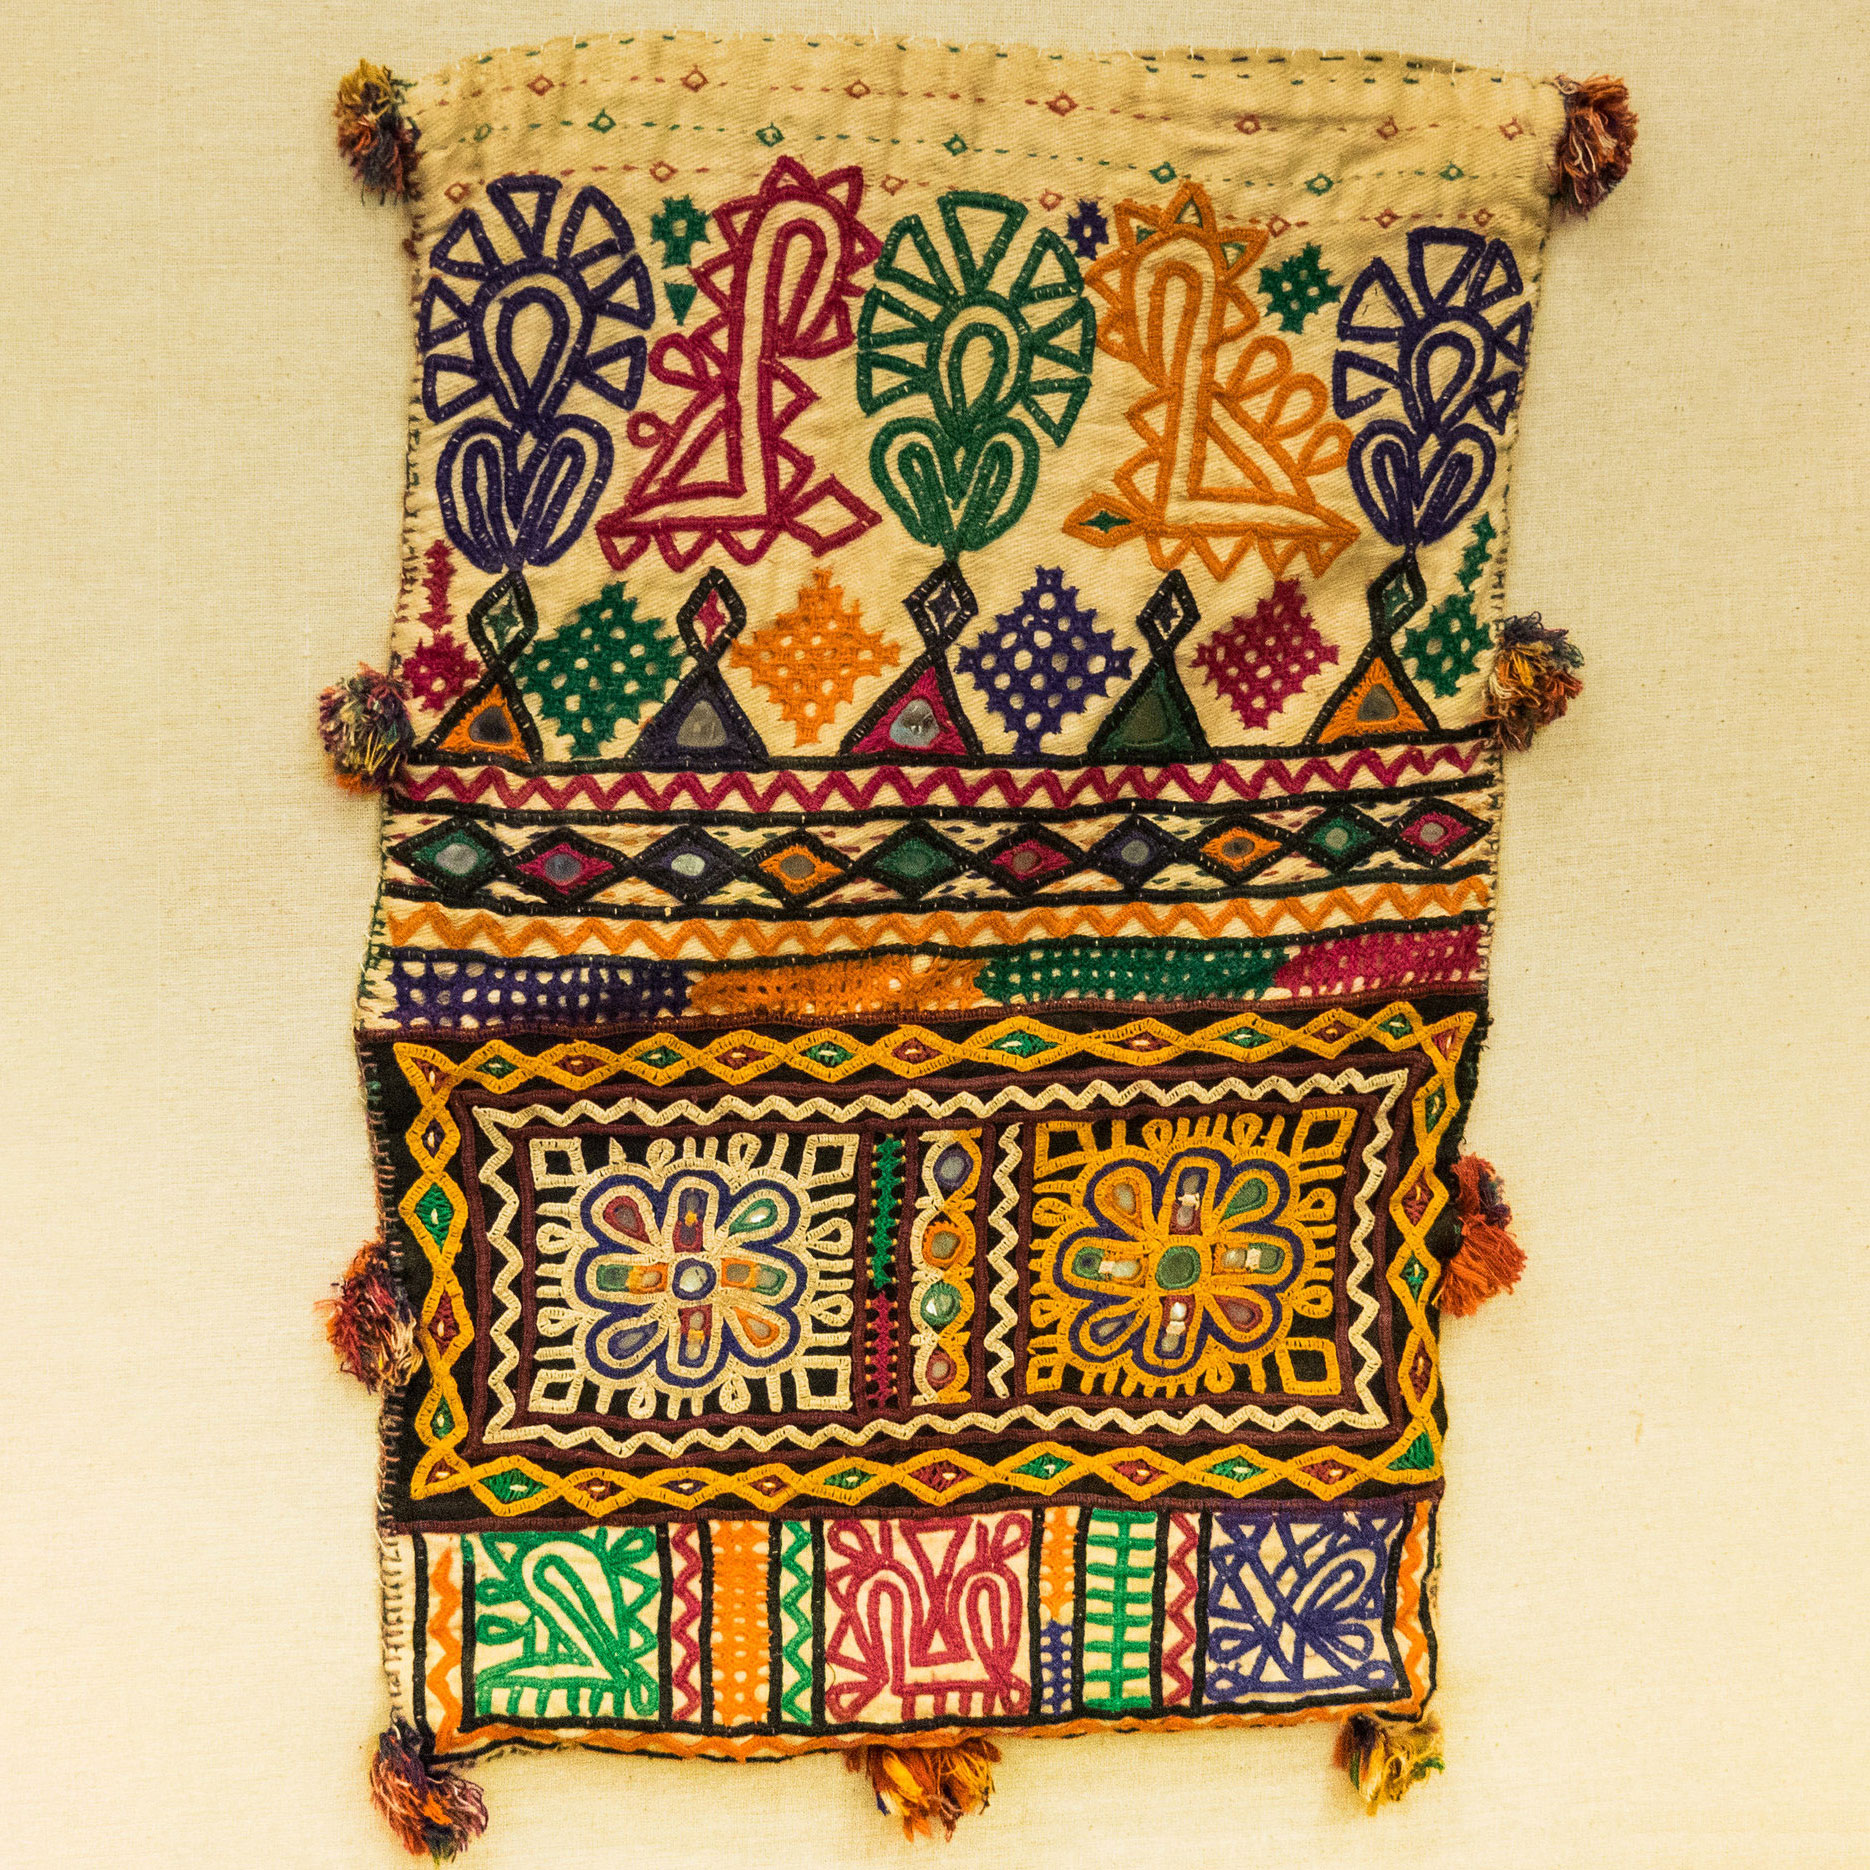 Tan cloth with many intricate colors embroidered